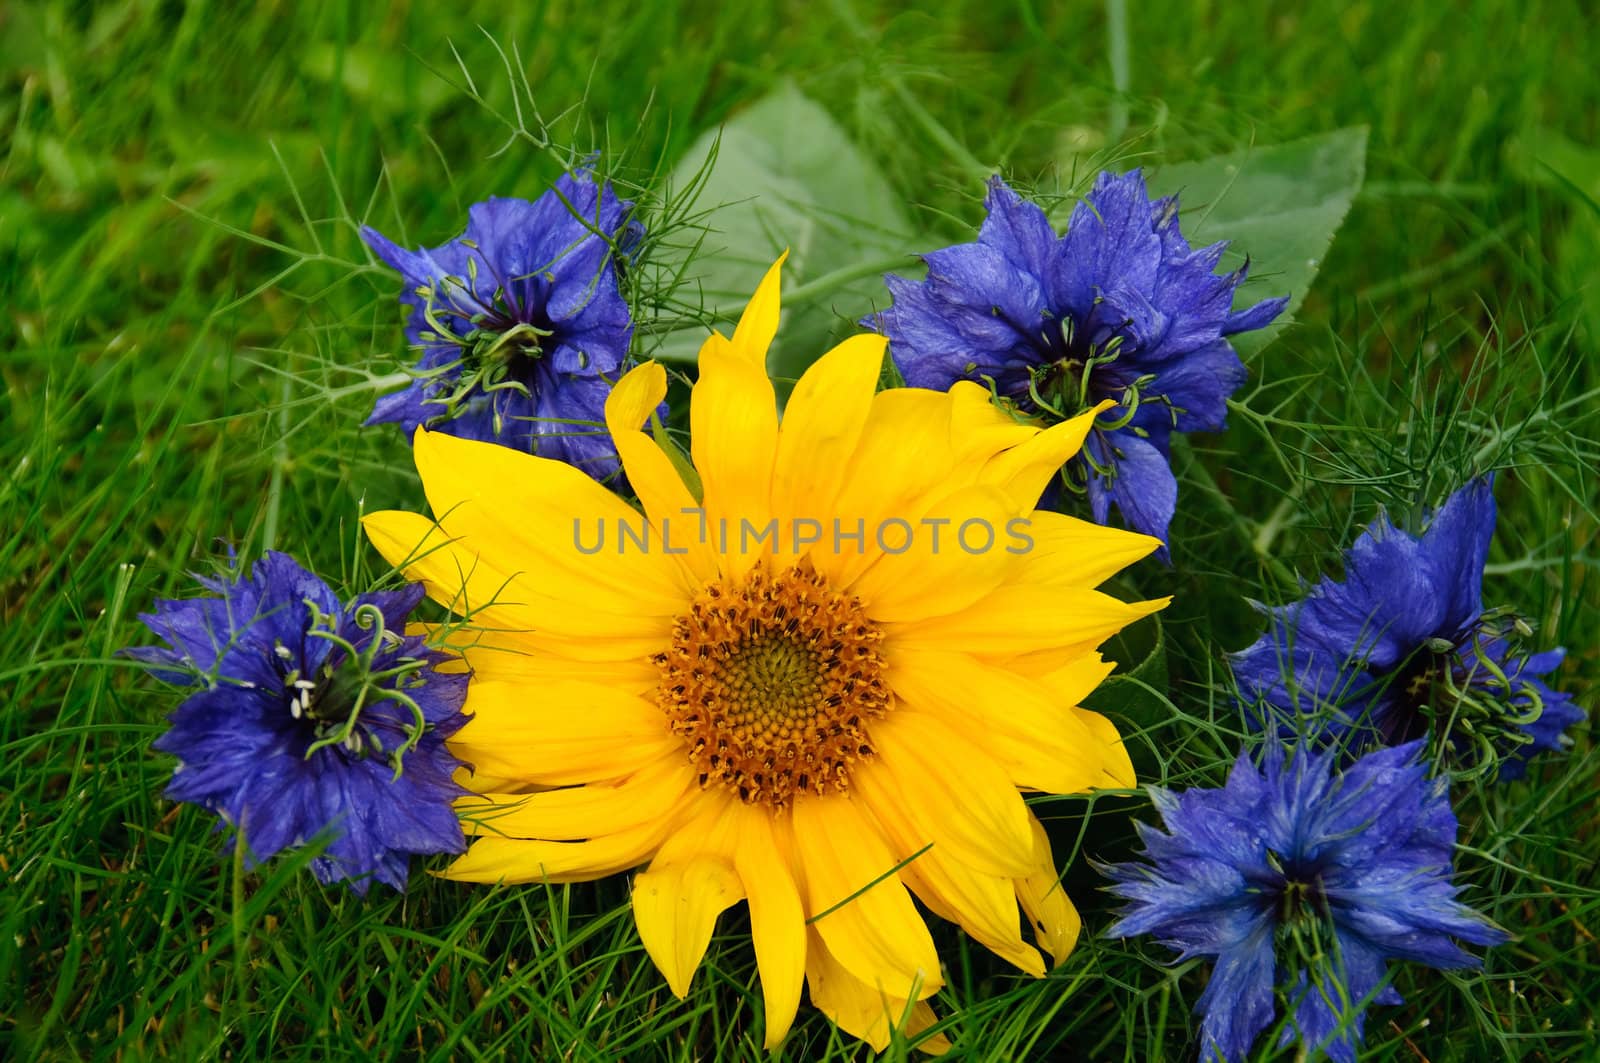 A sun flower and Nigella Damascena (love in a mist) lying in the grass